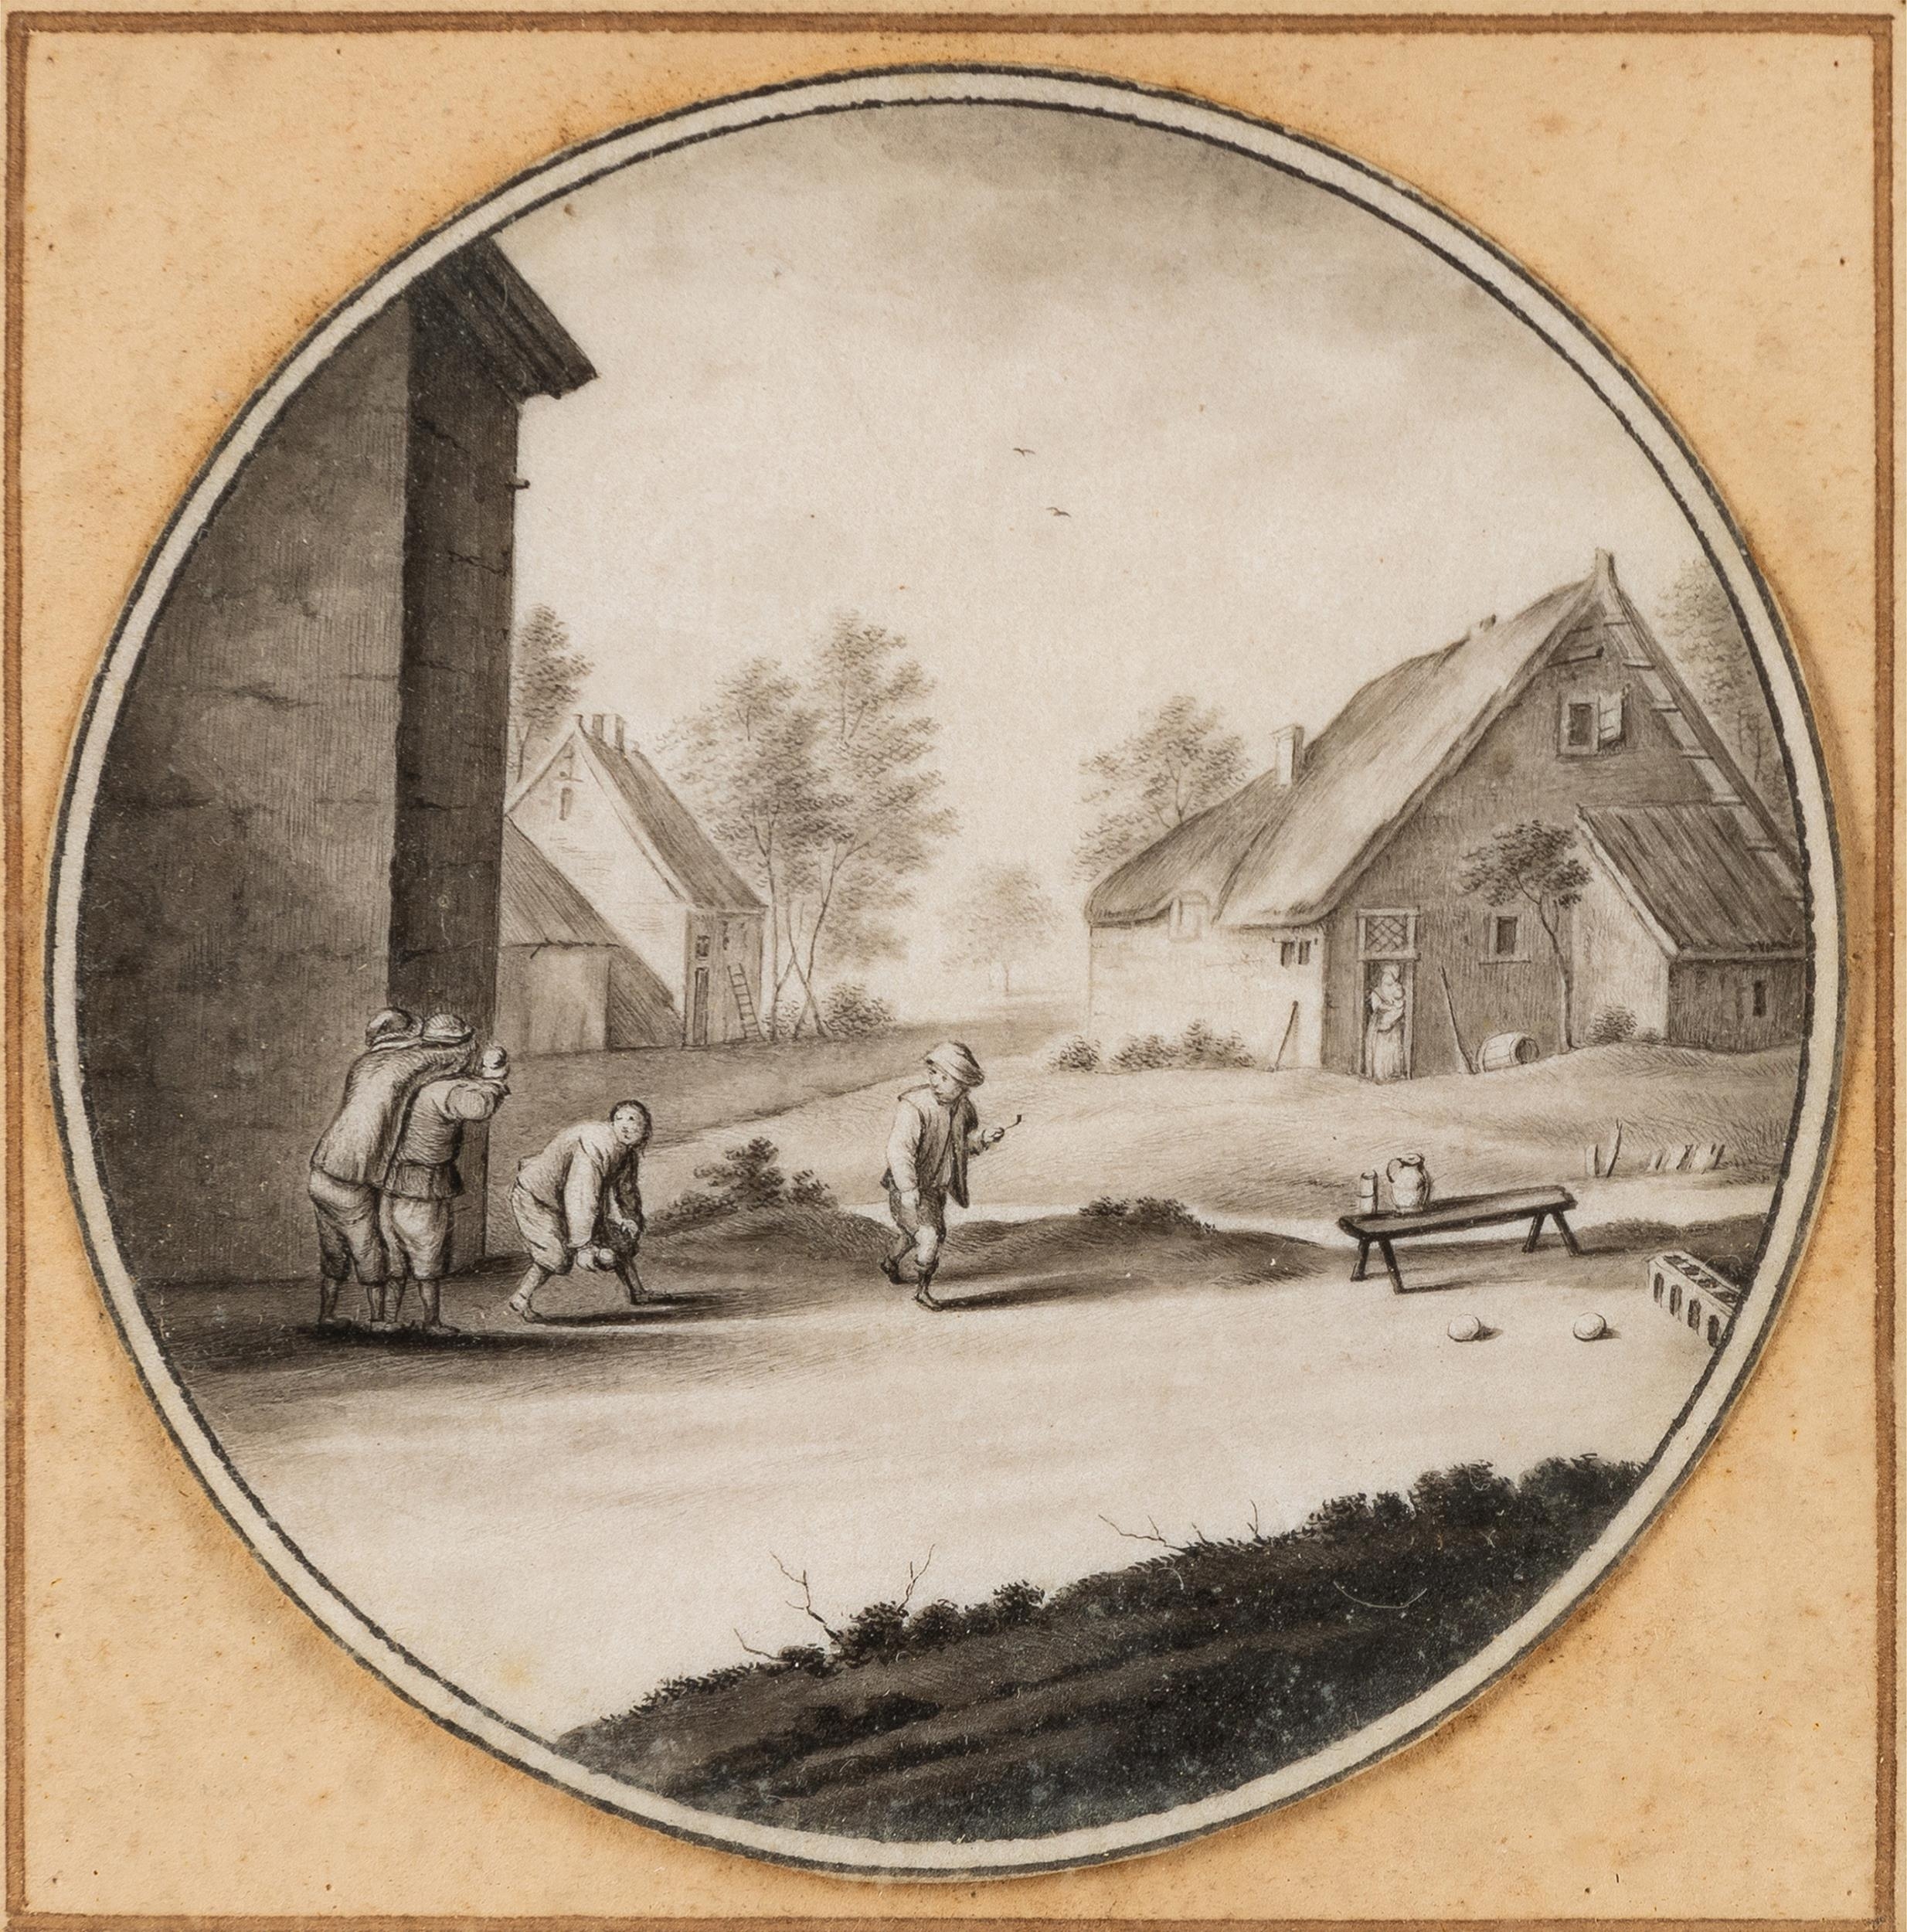 DUTCH SCHOOL (18TH CENTURY) MEN PLAYING SKITTLES IN A VILLAGE pen and ink on vellum 8cm diam - Image 2 of 3